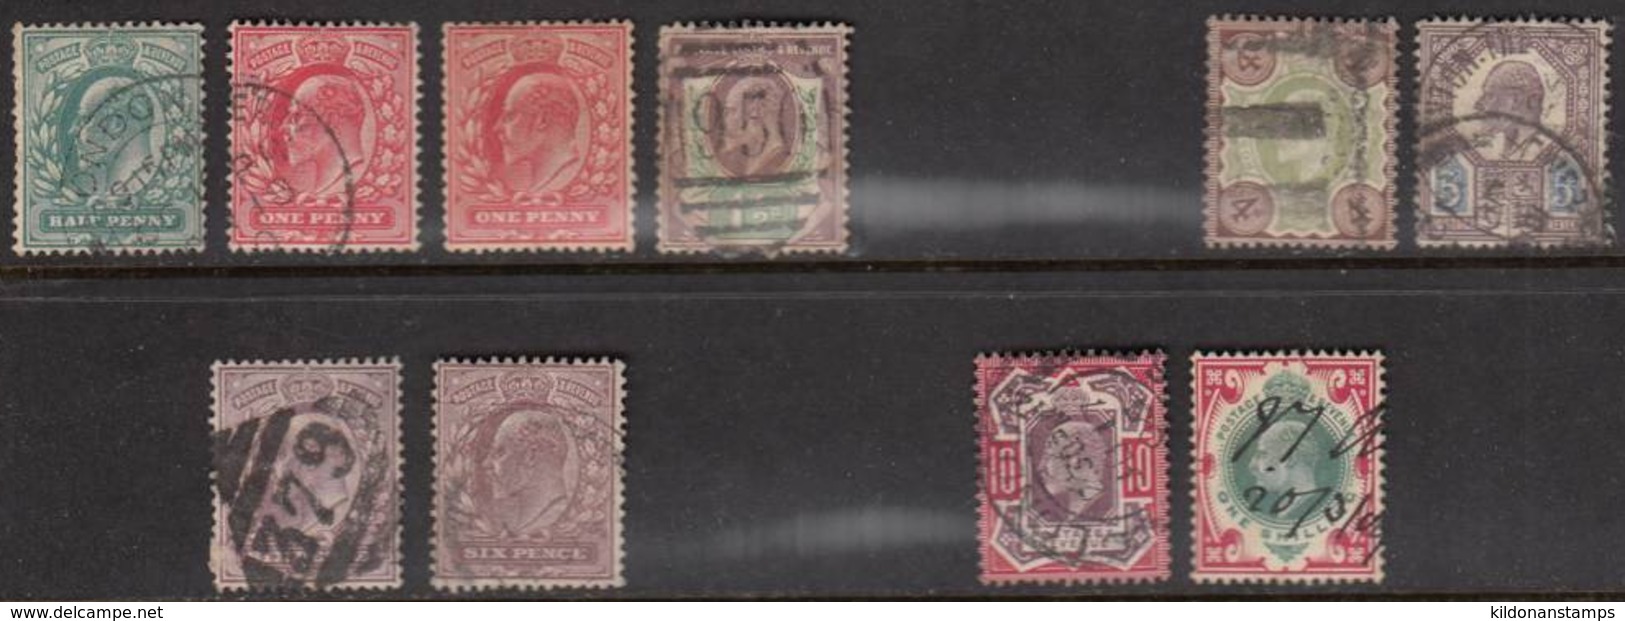 Great Britain 1902 Mint Mounted/cancelled, See Notes, Sc# 127-129,133-134,135a,135b,137a,140 (incl 128a) - Oblitérés